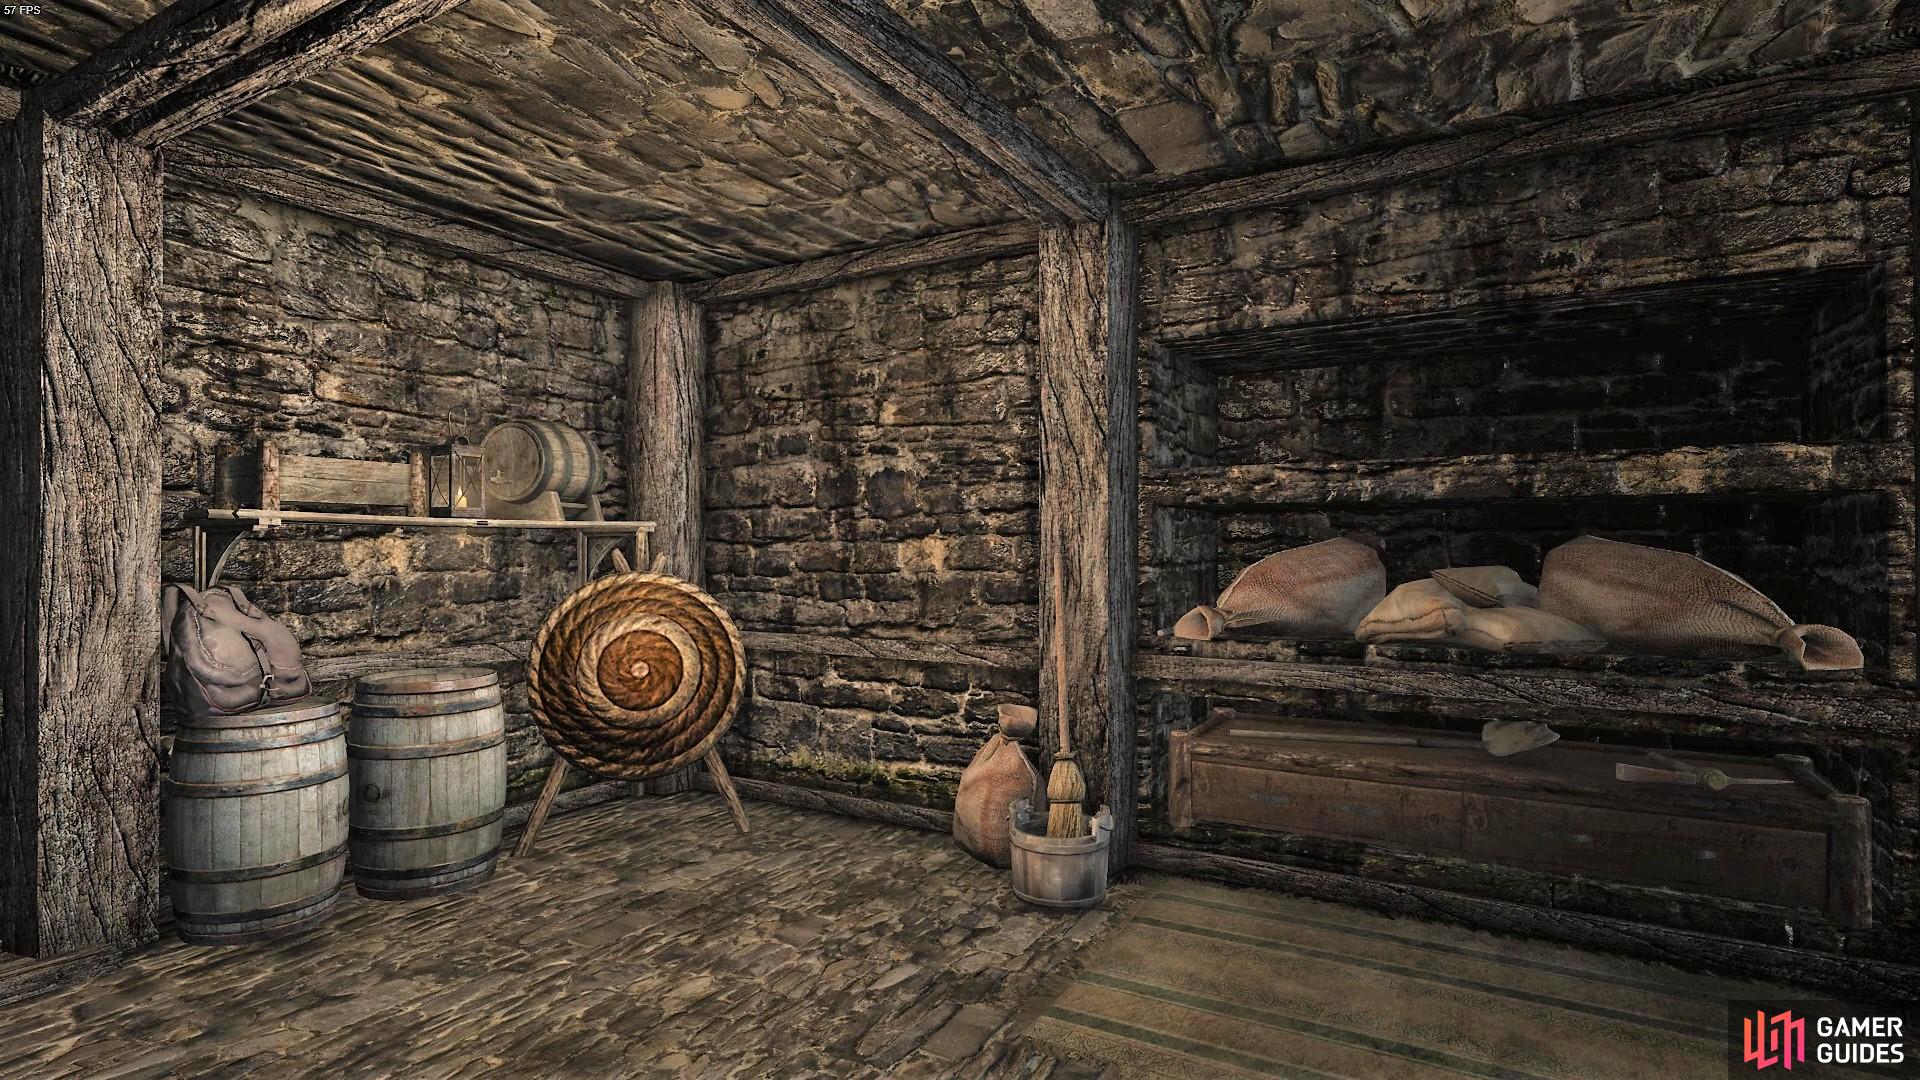 You could even practice your archery in the cellar (won’t skill build though unfortunately).